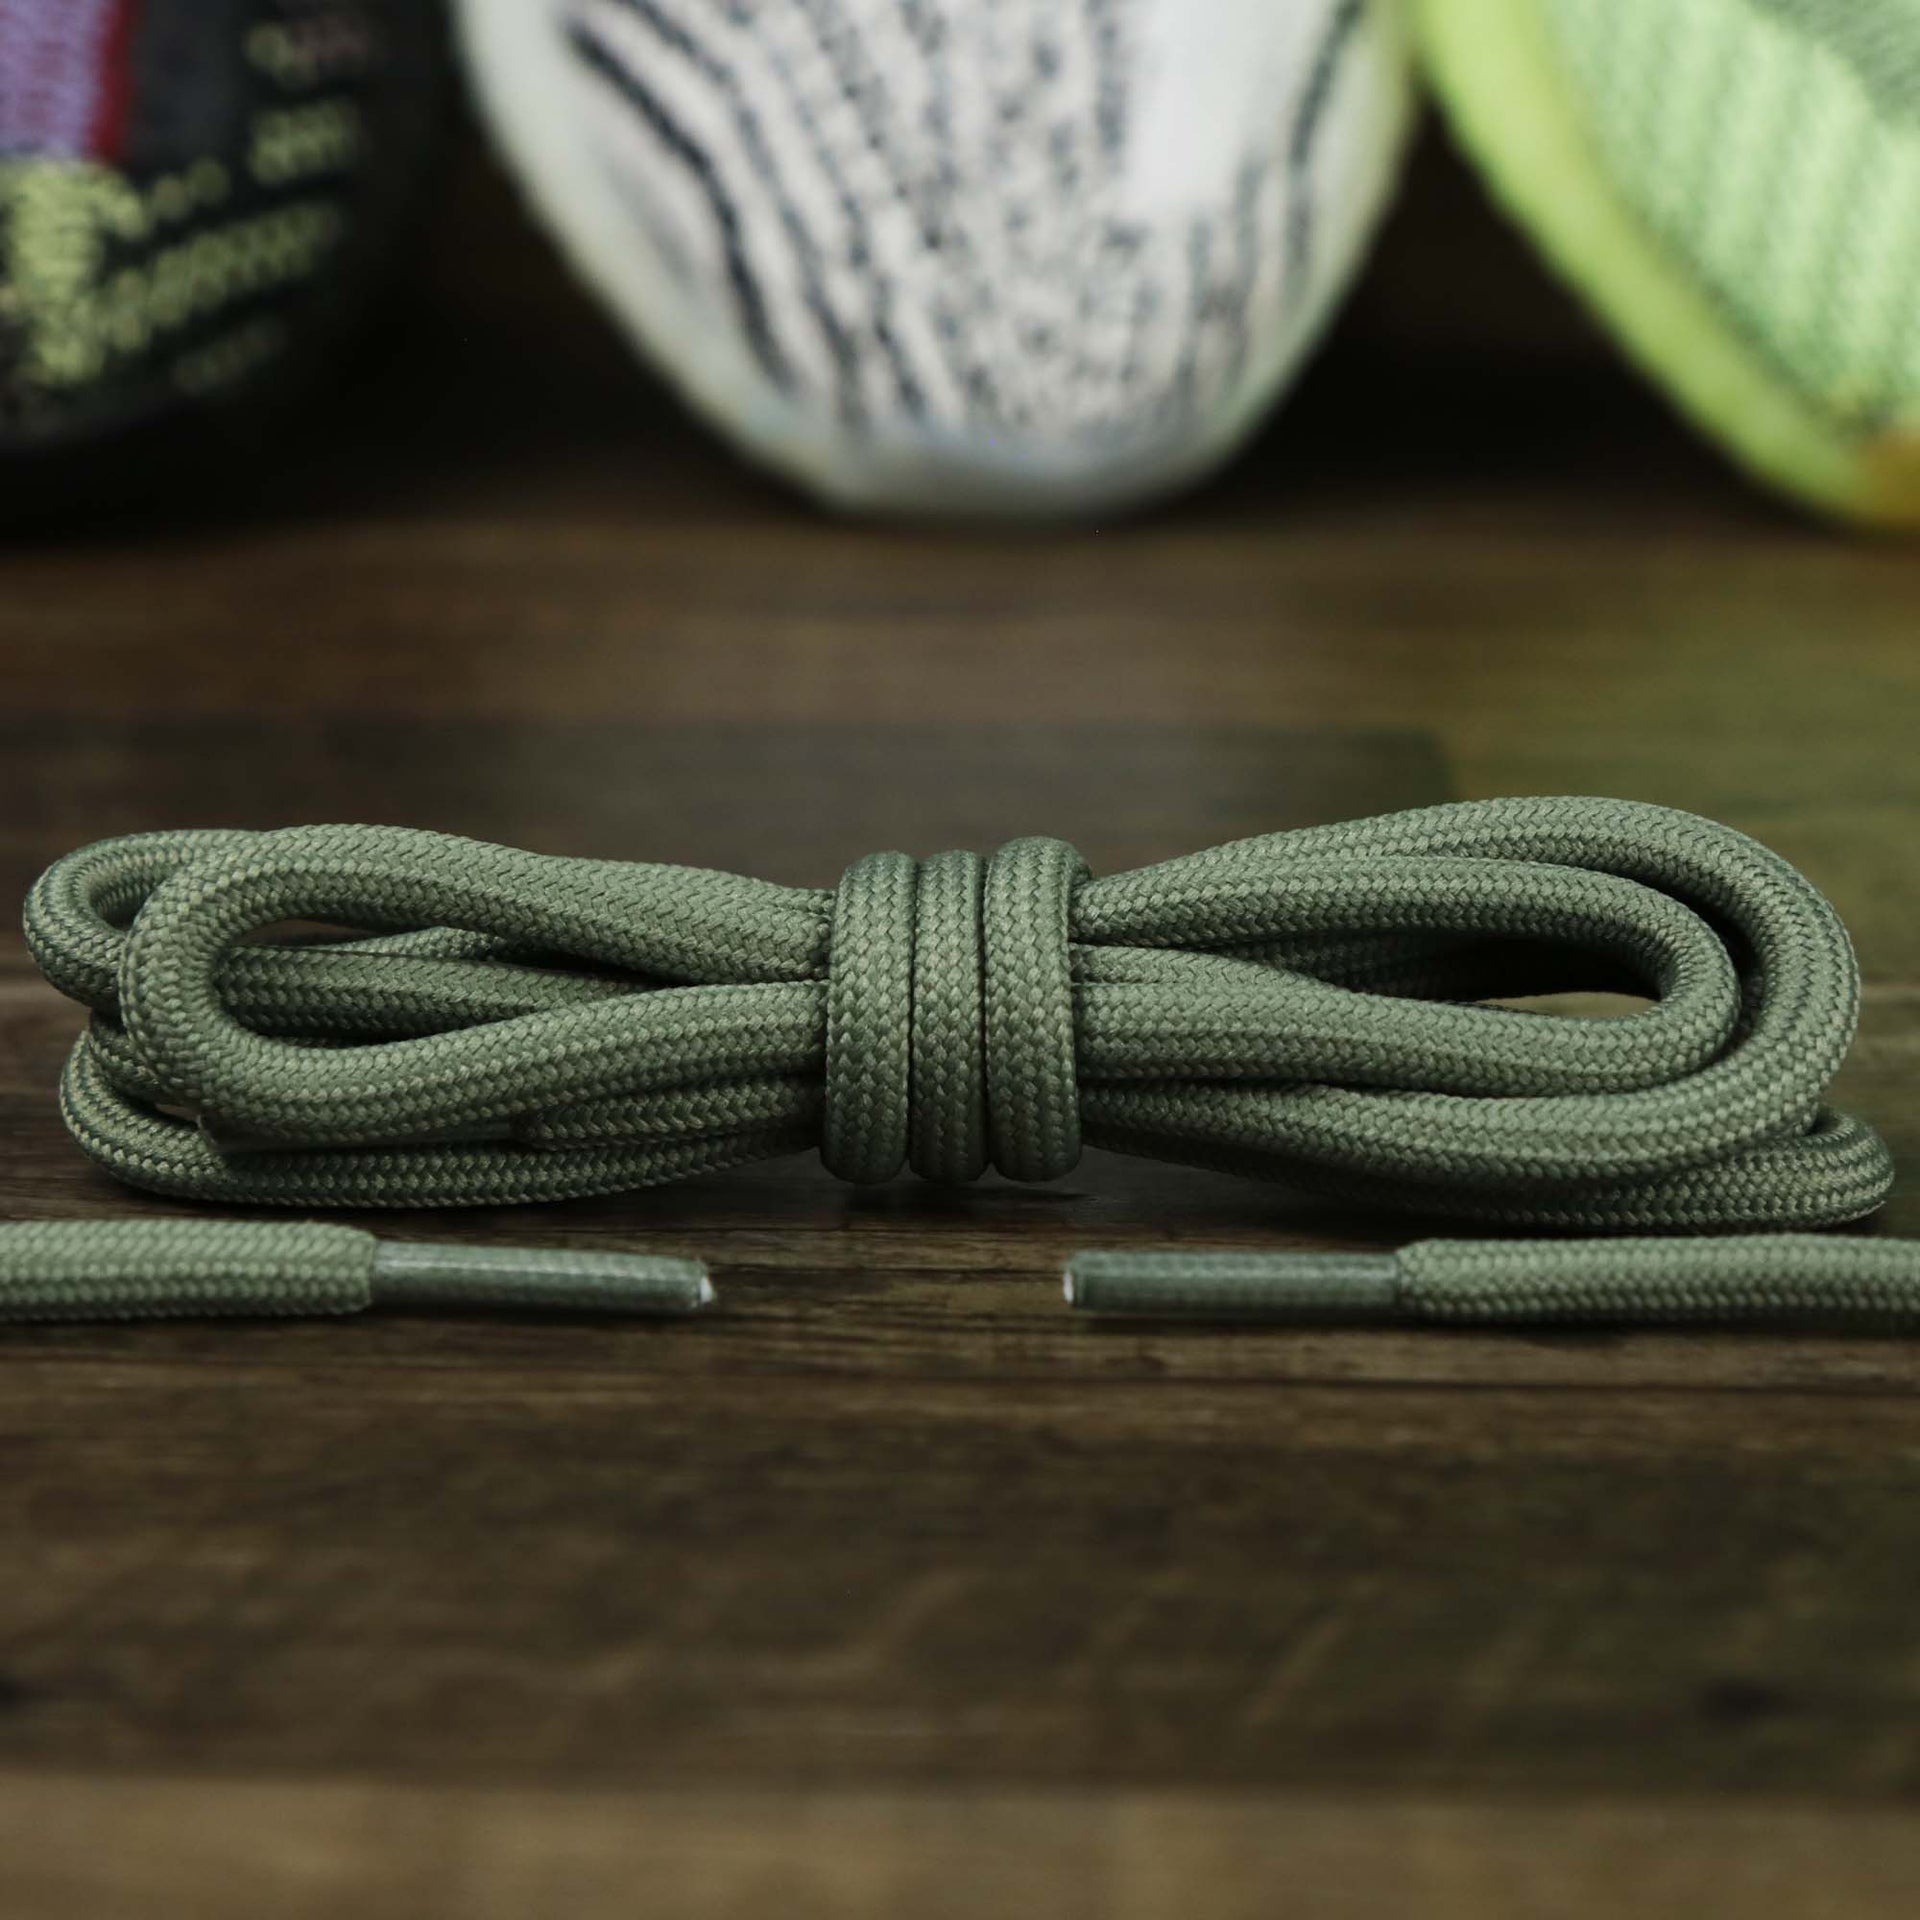 The Solid Rope Military Green Shoelaces with Military Green Aglets | 120cm Capswag folded up